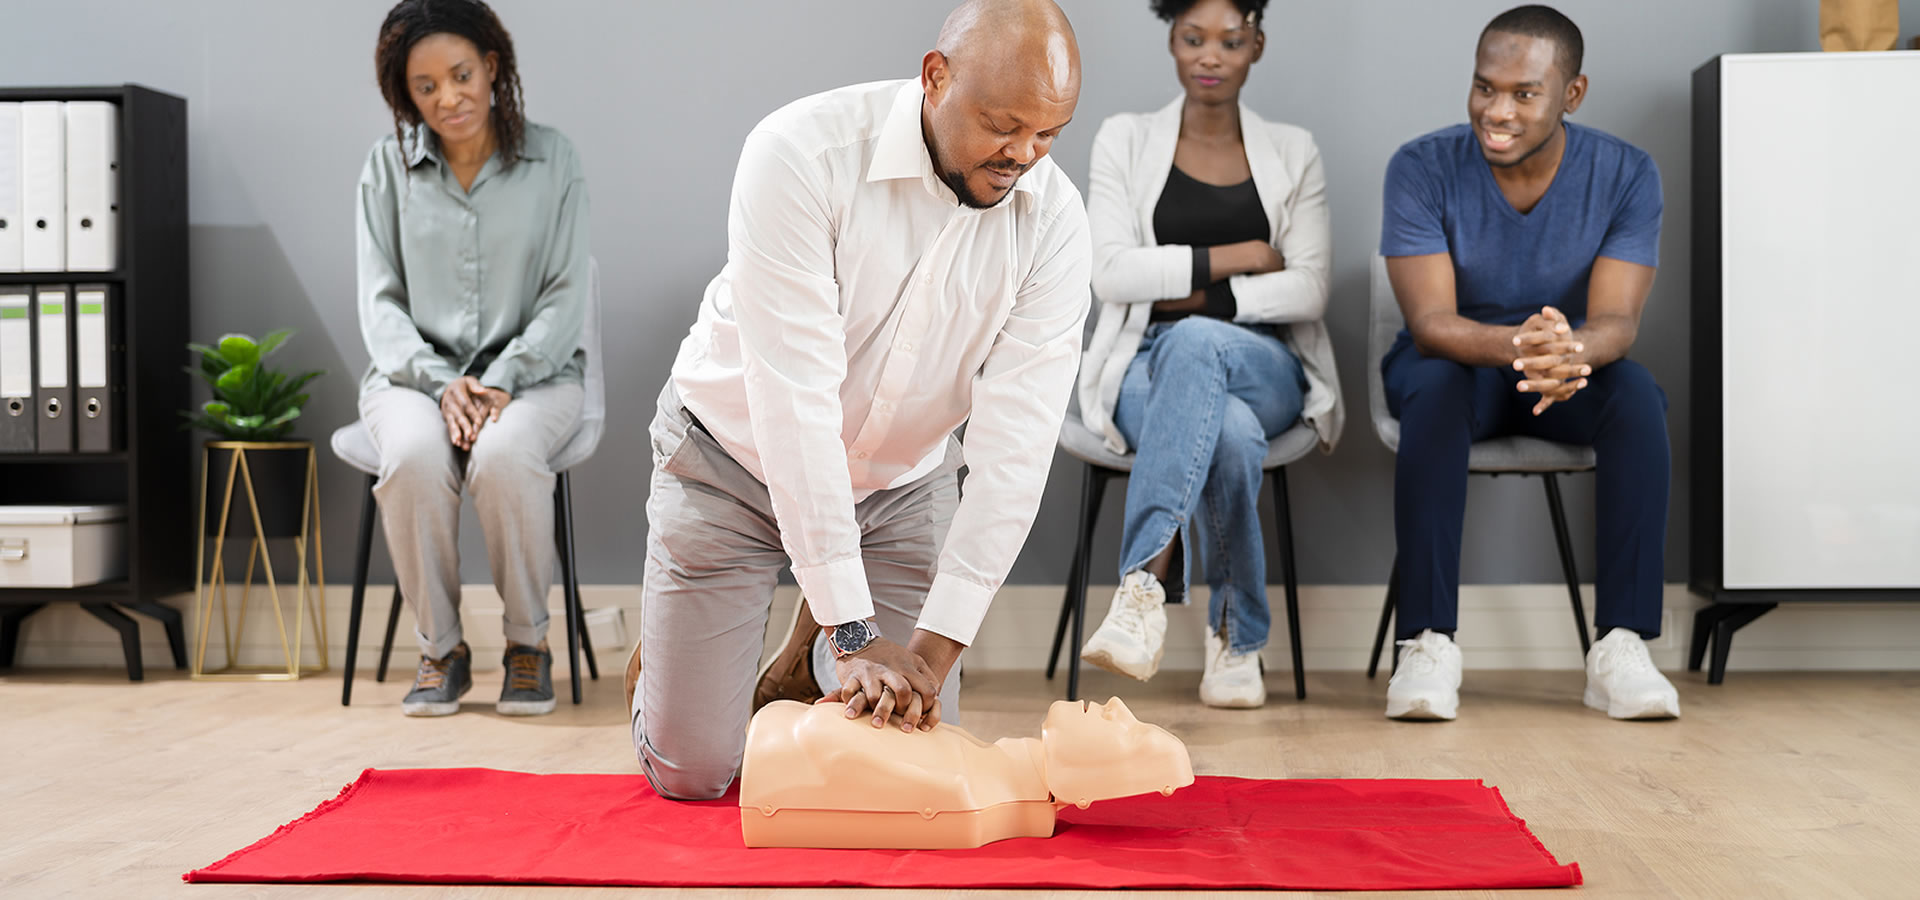 CPR and First Aid Do’s and Don’ts